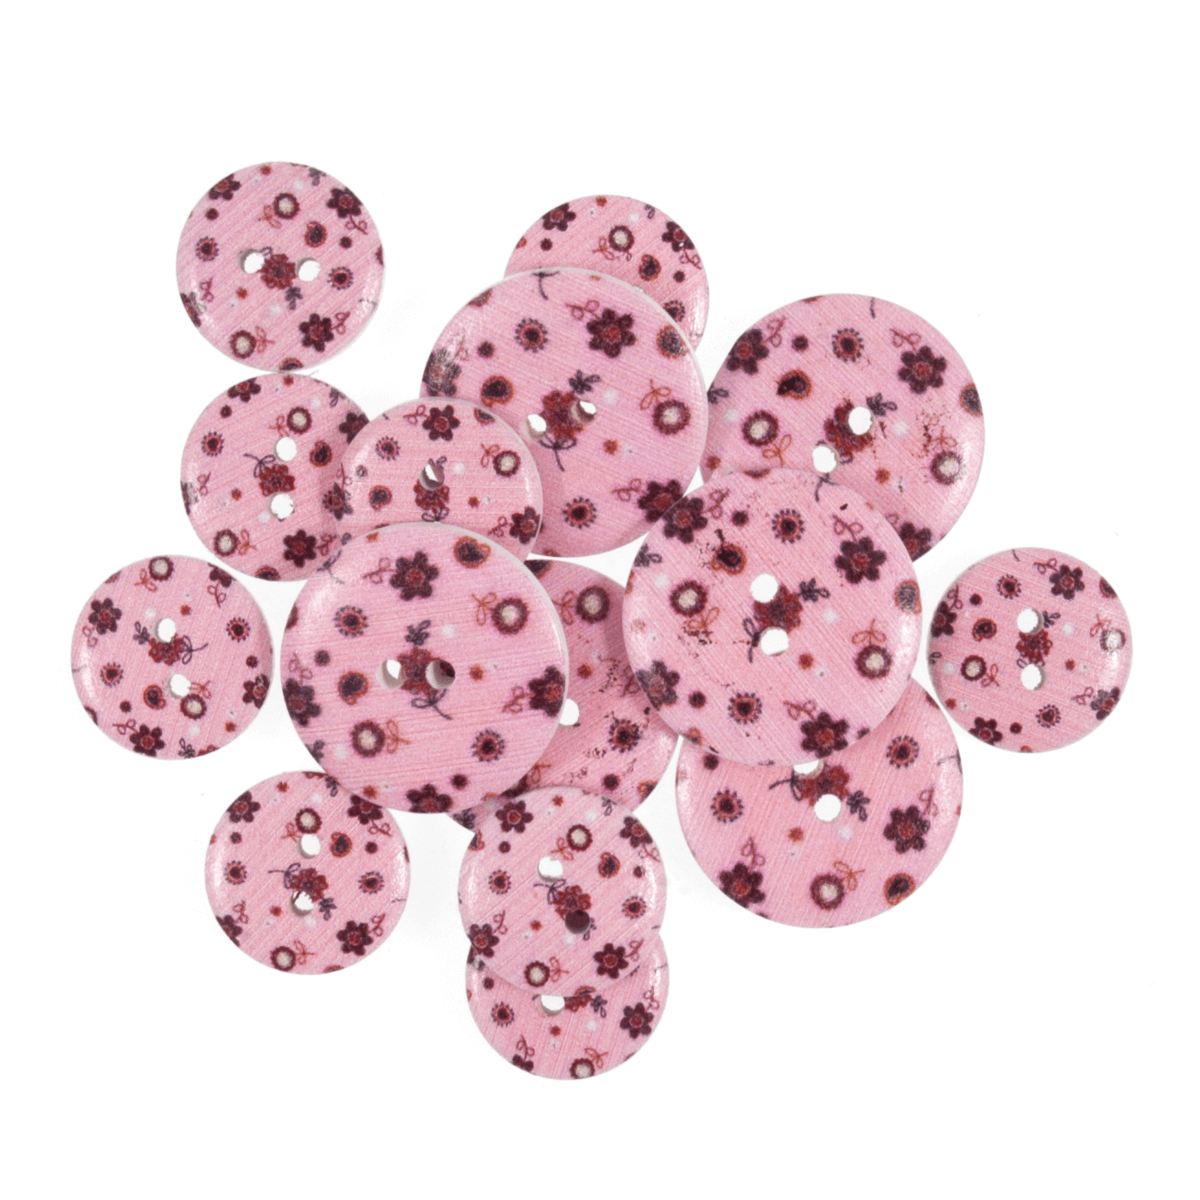 15 x Assorted Tiny Ditsy Floral Wooden Craft Buttons 18mm - 25mm 